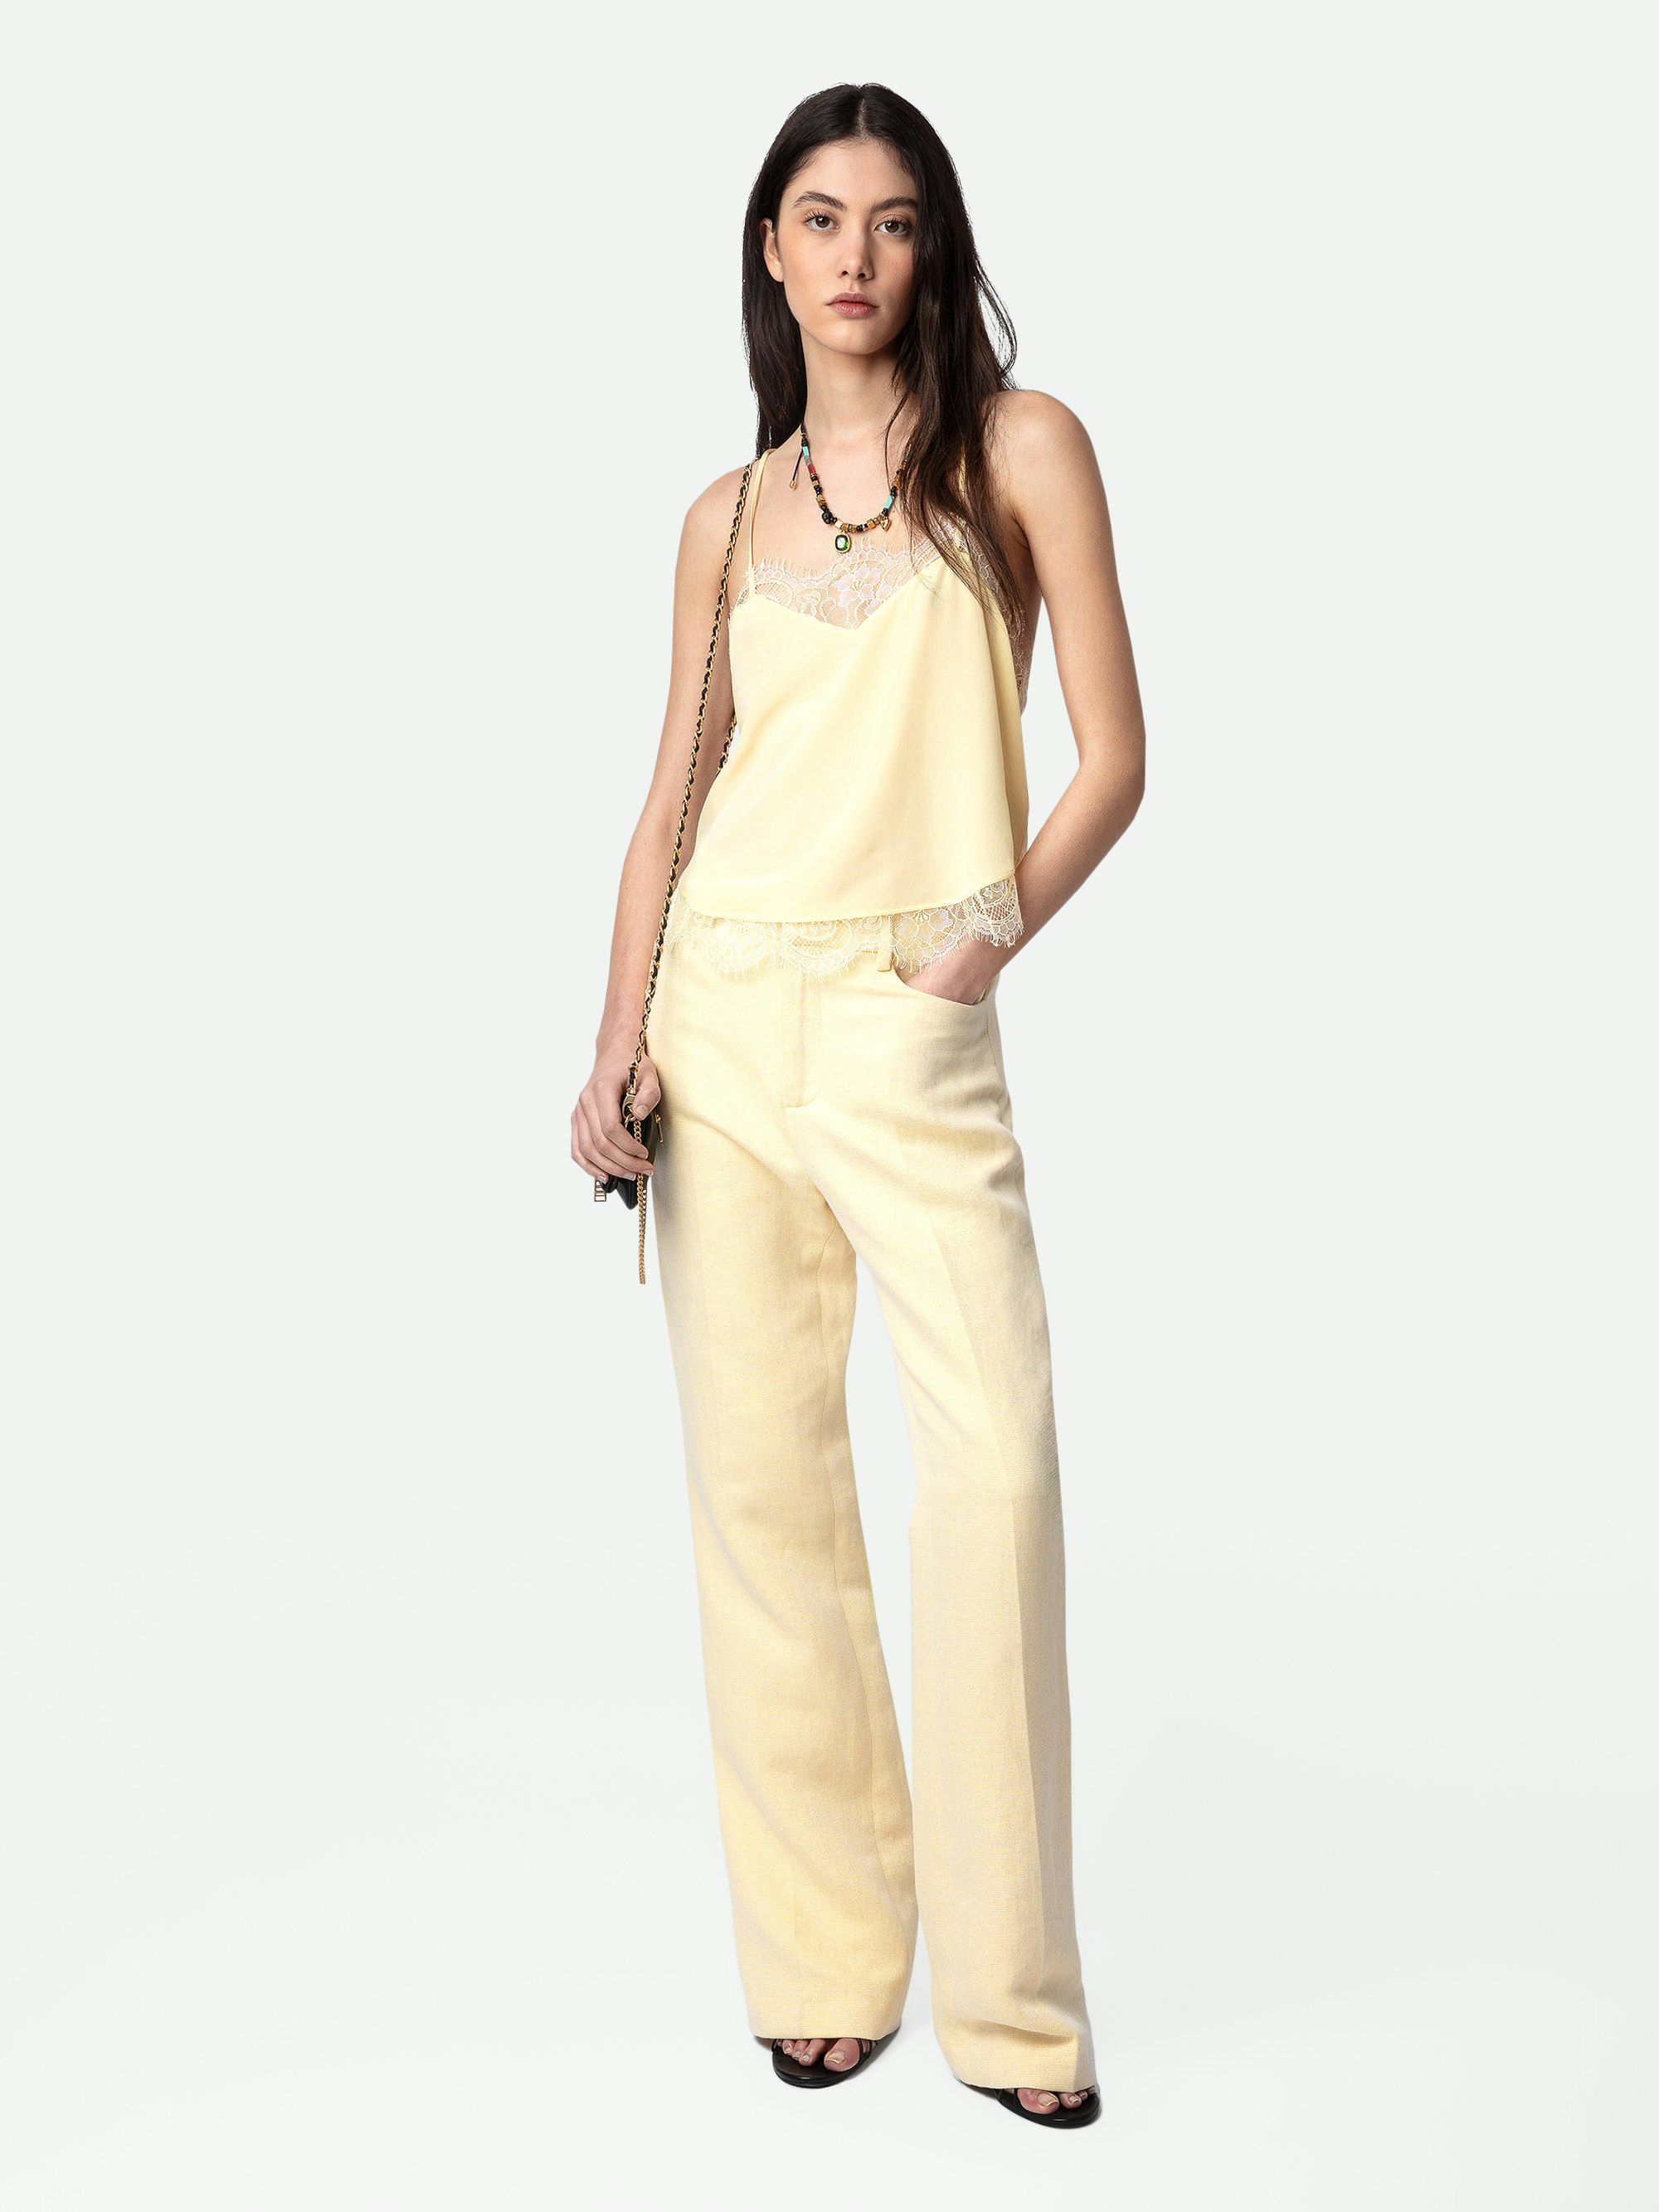 Pistol Trousers - Light yellow linen flared tailored trousers with pockets and pleats.